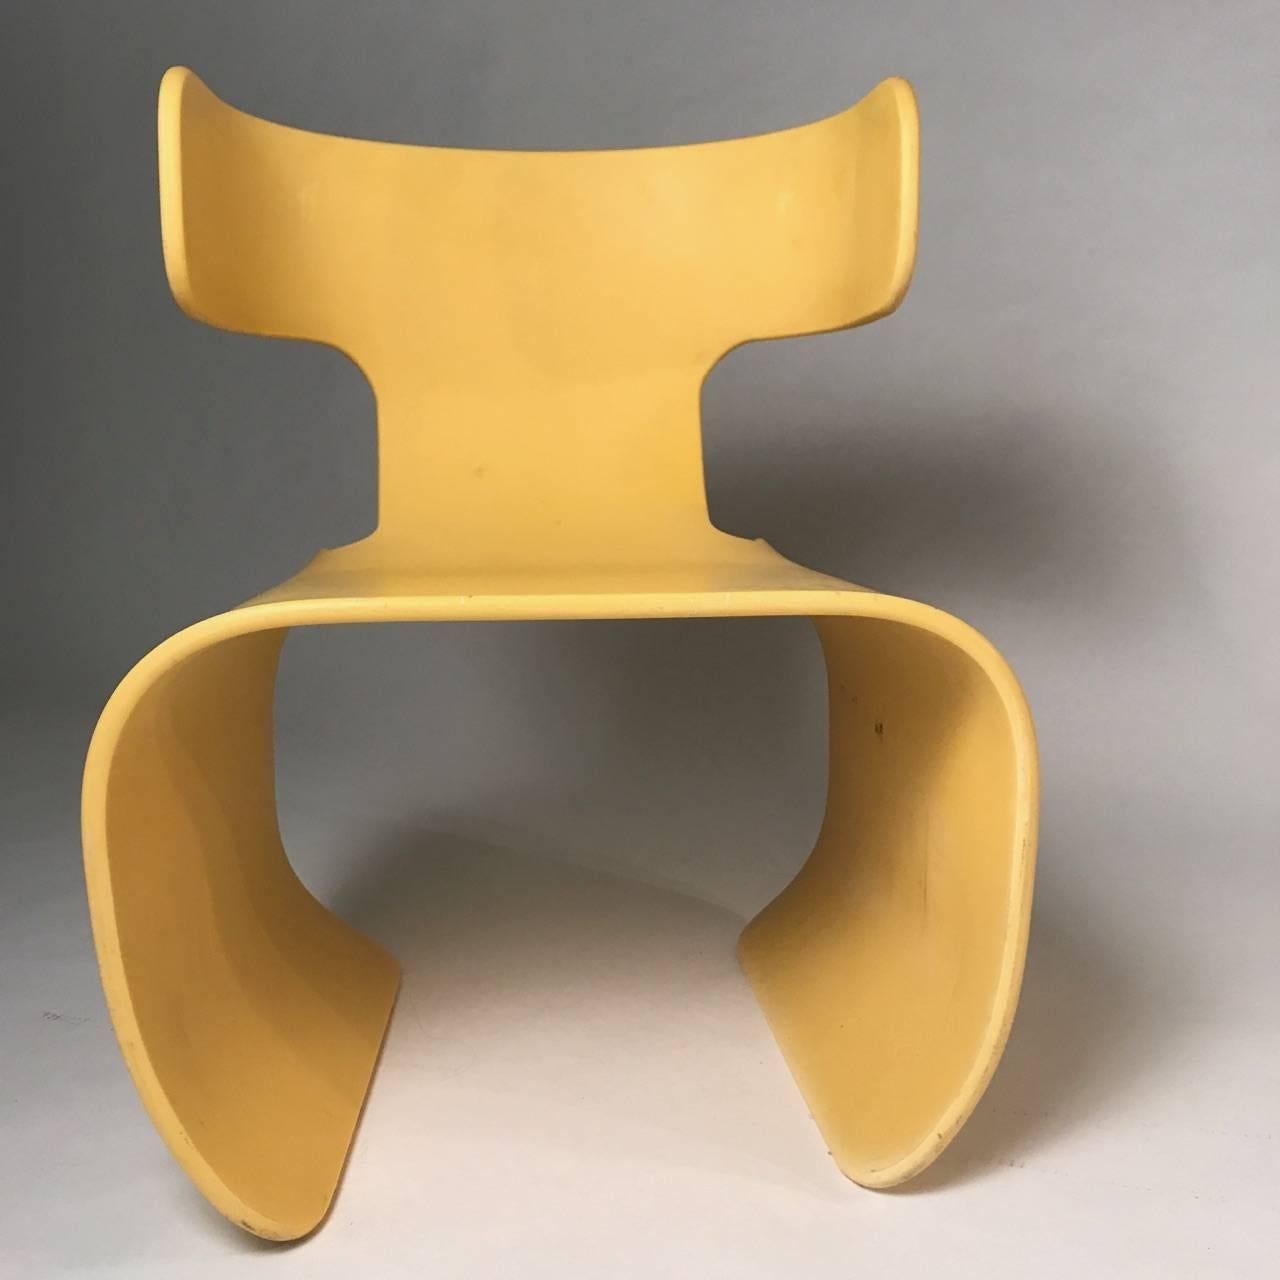 A wonderful form exhibiting the style of Pantone or Starck
This example is un-marked. The creator exhibits a strong modernist style
and is an curious example of the 1980s manufacturing style.